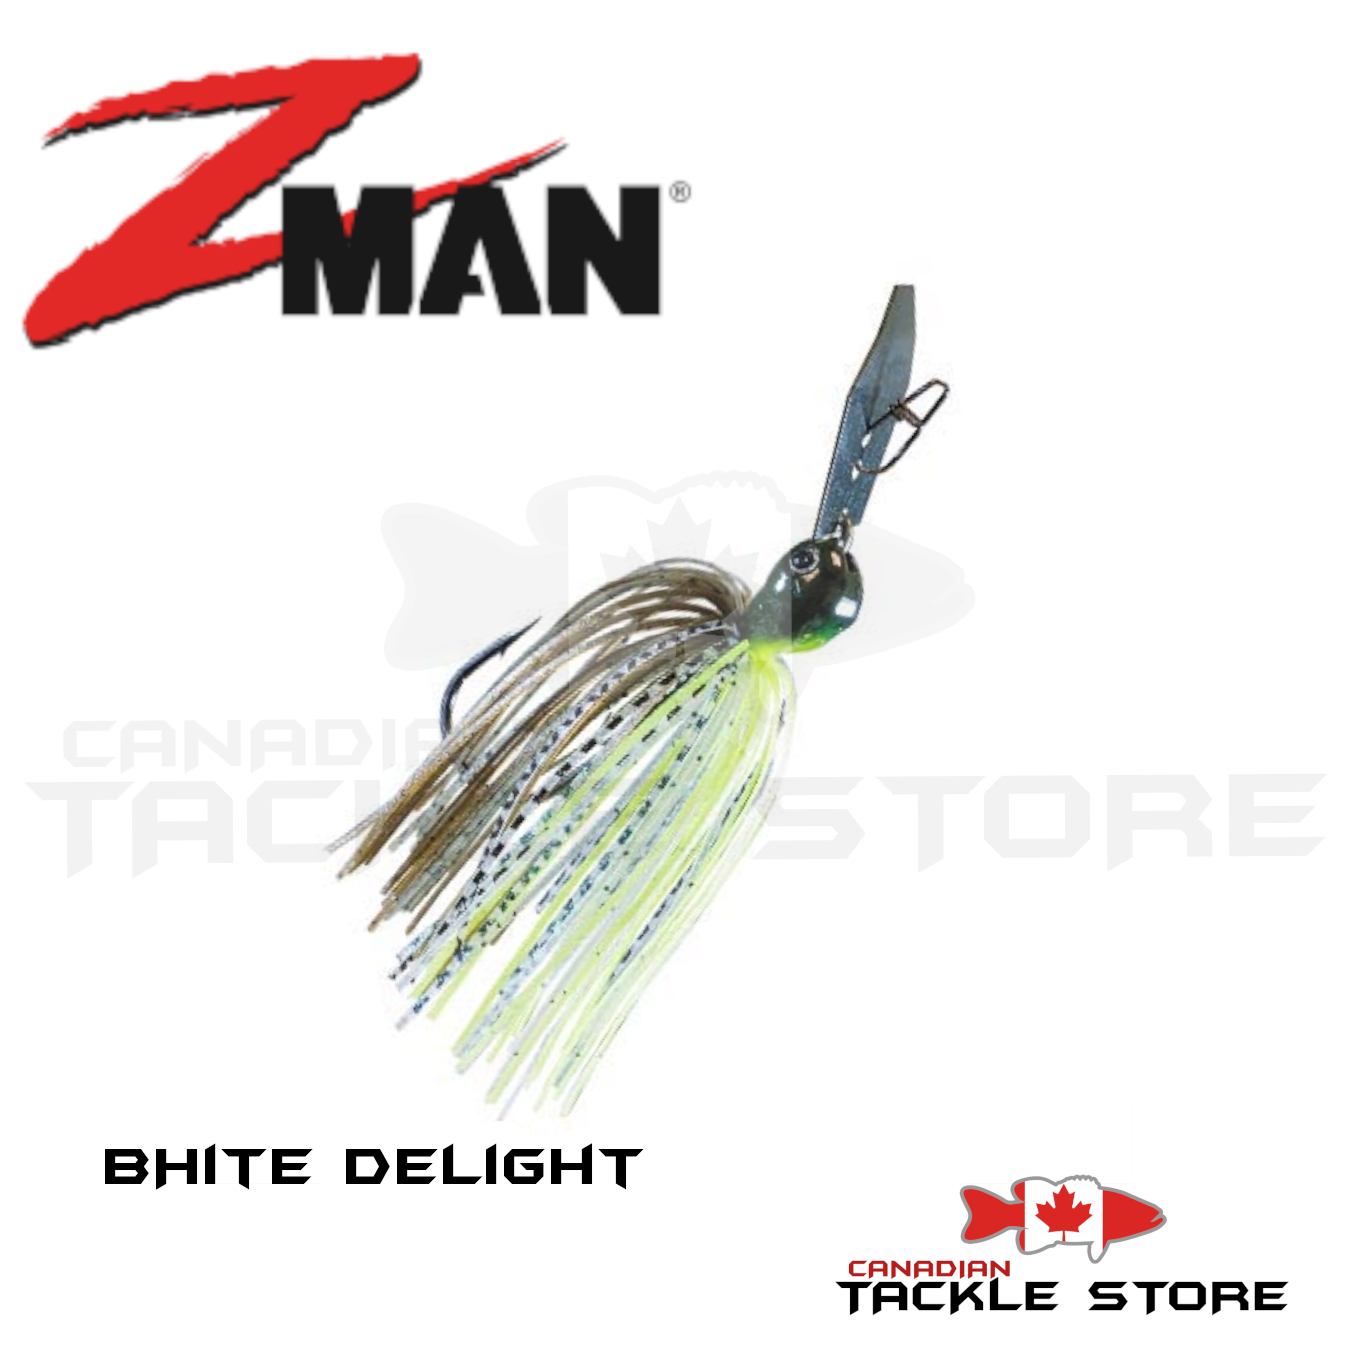 ZMAN Z MAN SwimmerZ 6 Made in USA Soft Plastic Fishing Lure Baits